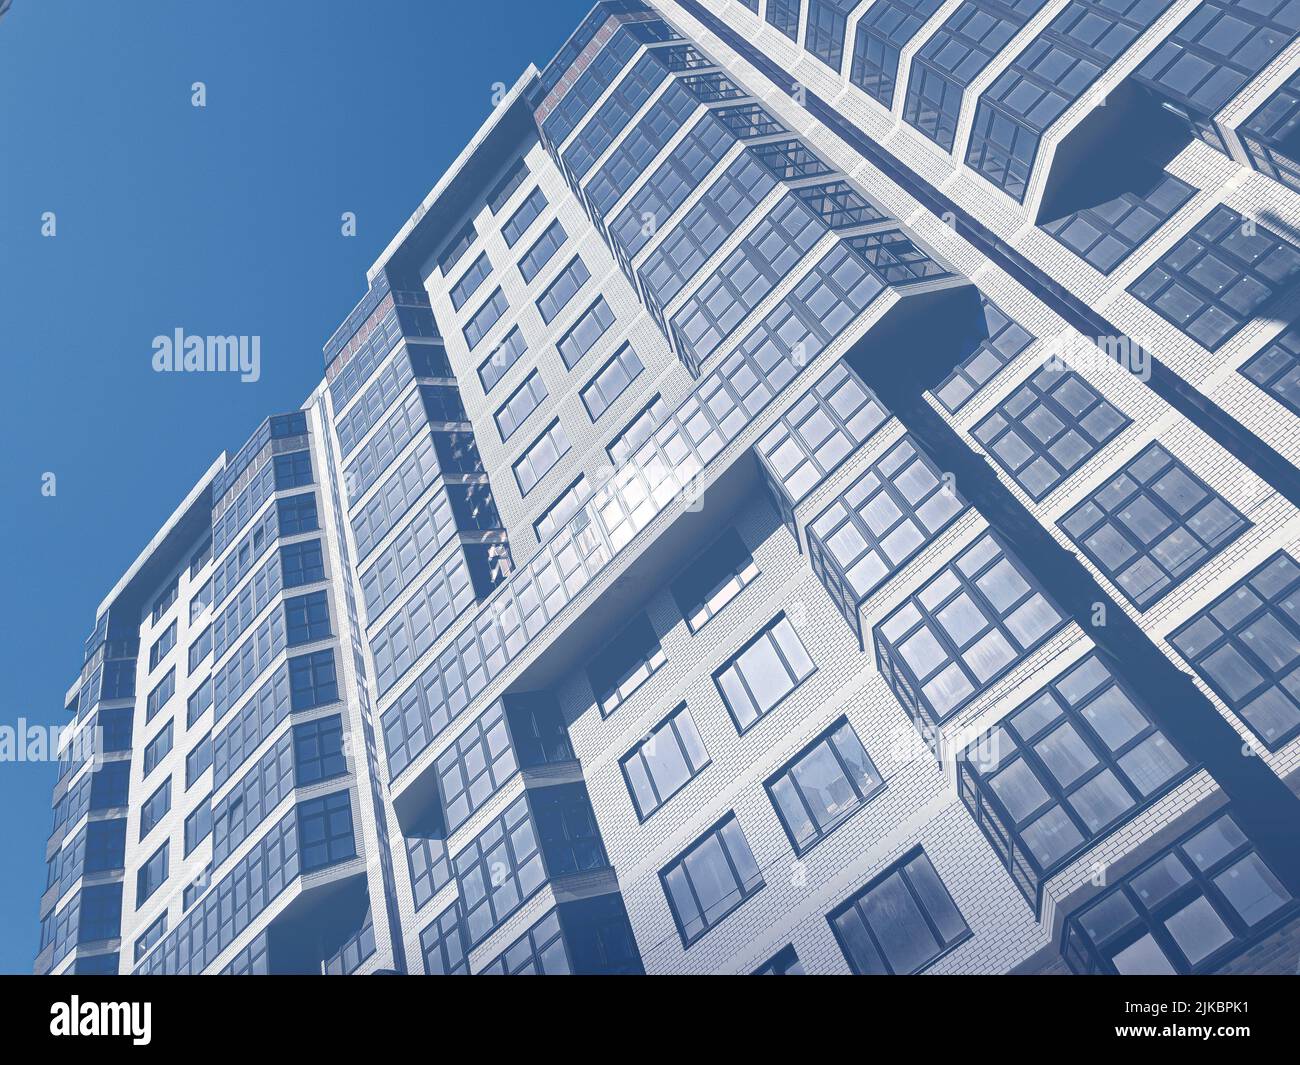 Abstract exterior of a modern residential building. Modern residential architecture.Tinted blue image. Stock Photo